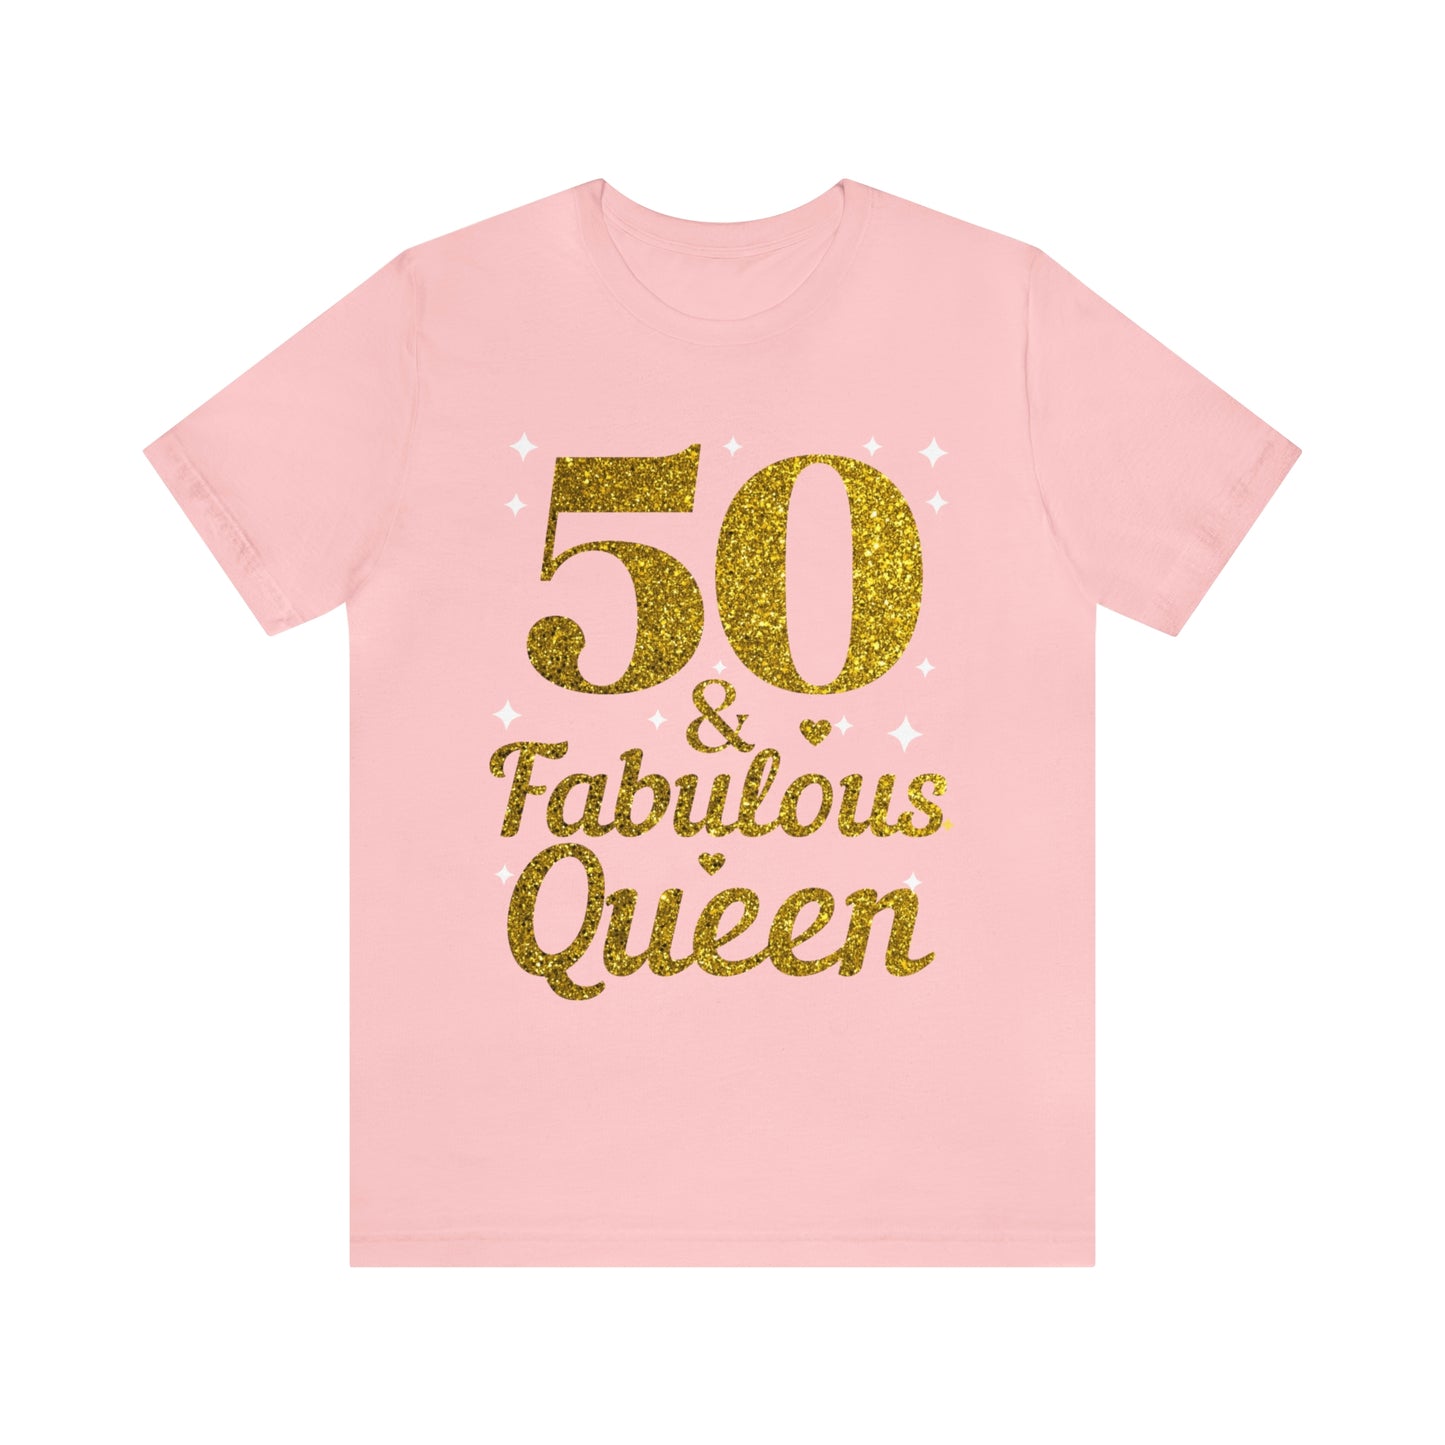 Funny 50th birthday shirt, 50th birthday Tshirt, 50 and fabulous Queen, birthday queen shirt, Gift for 50th birthday, Vintage shirt, birthday gift, birthday girl shirt, mom’s birthday gift, mom gift, wife gift,